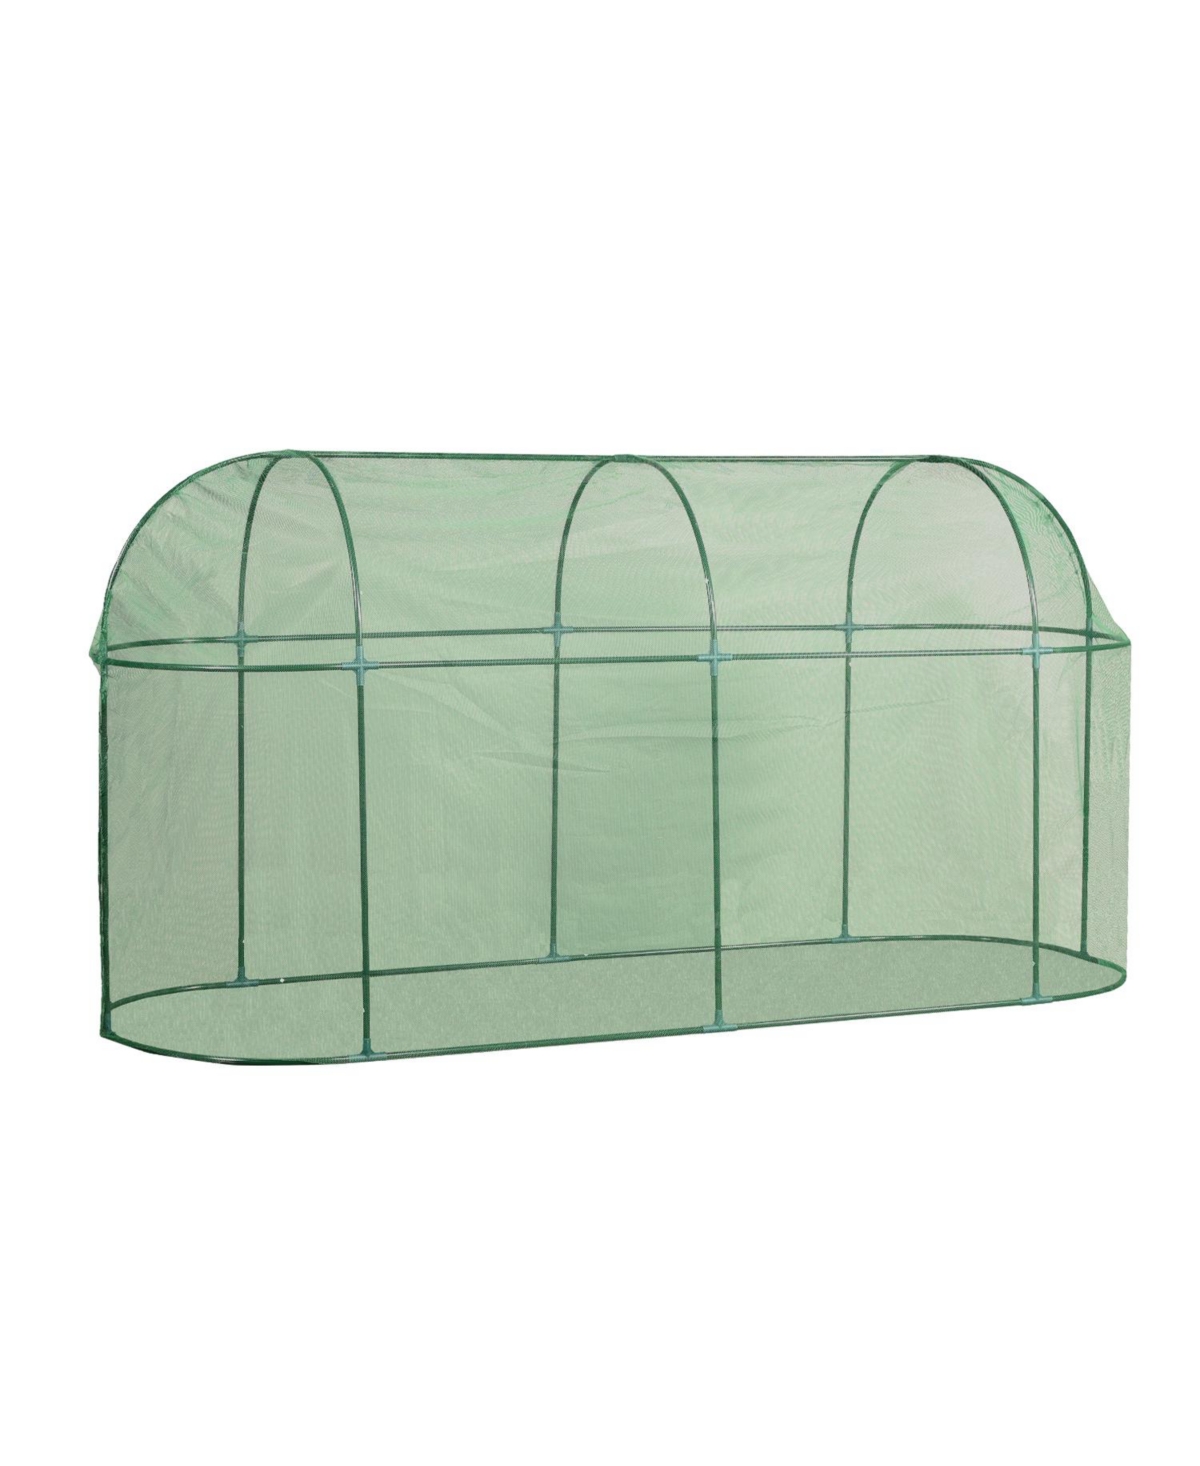 Crop Cage Plant Protection Tent Netting Cover with Zippered Enclosure Door - Green